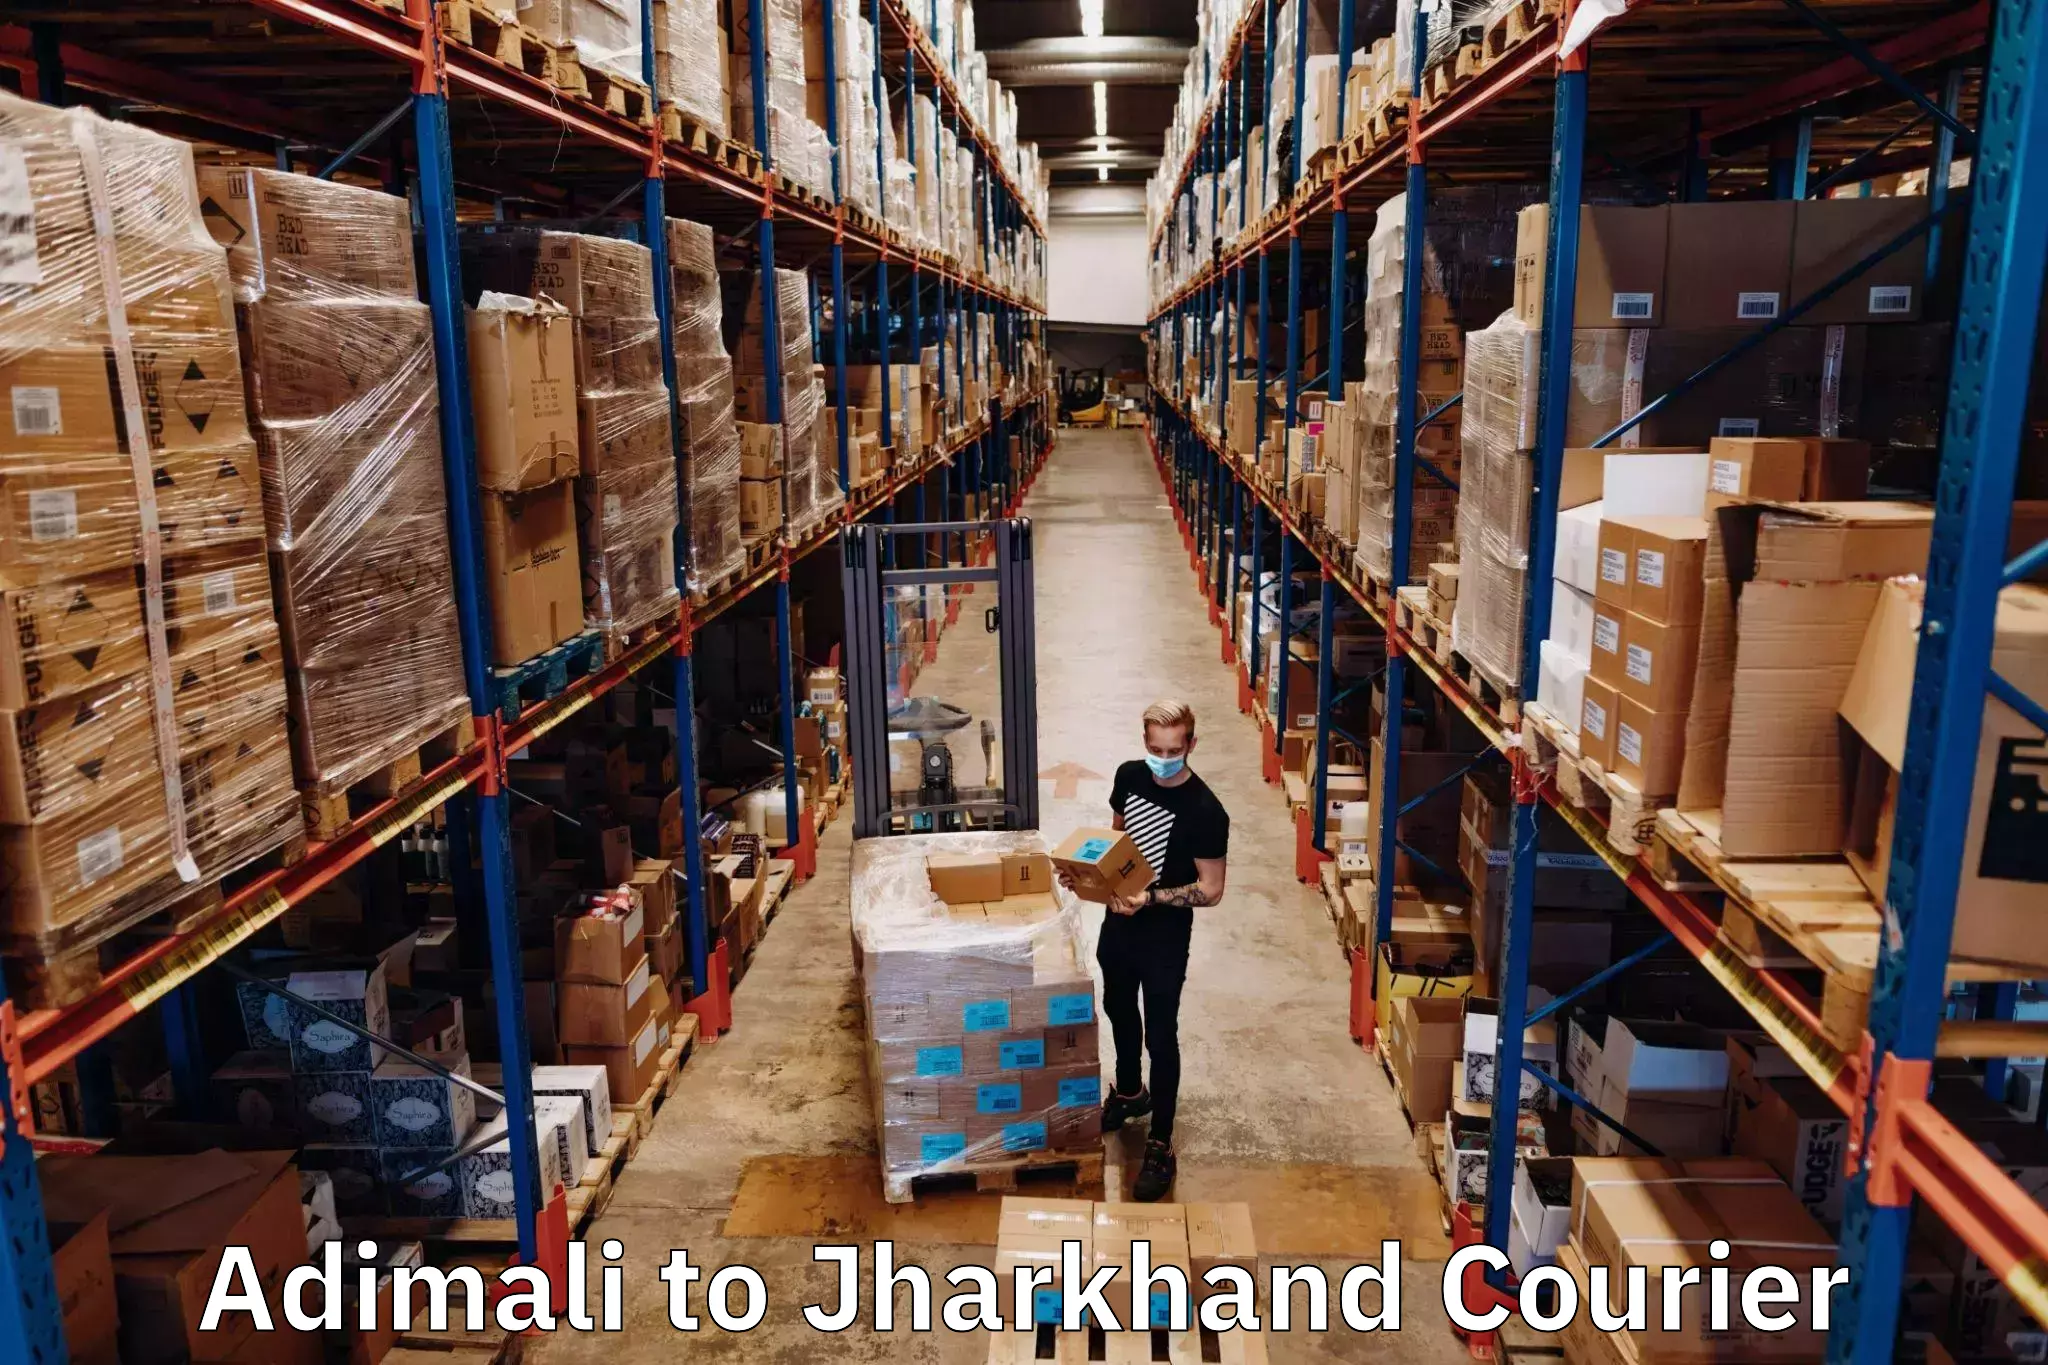 On-call courier service Adimali to Jamshedpur